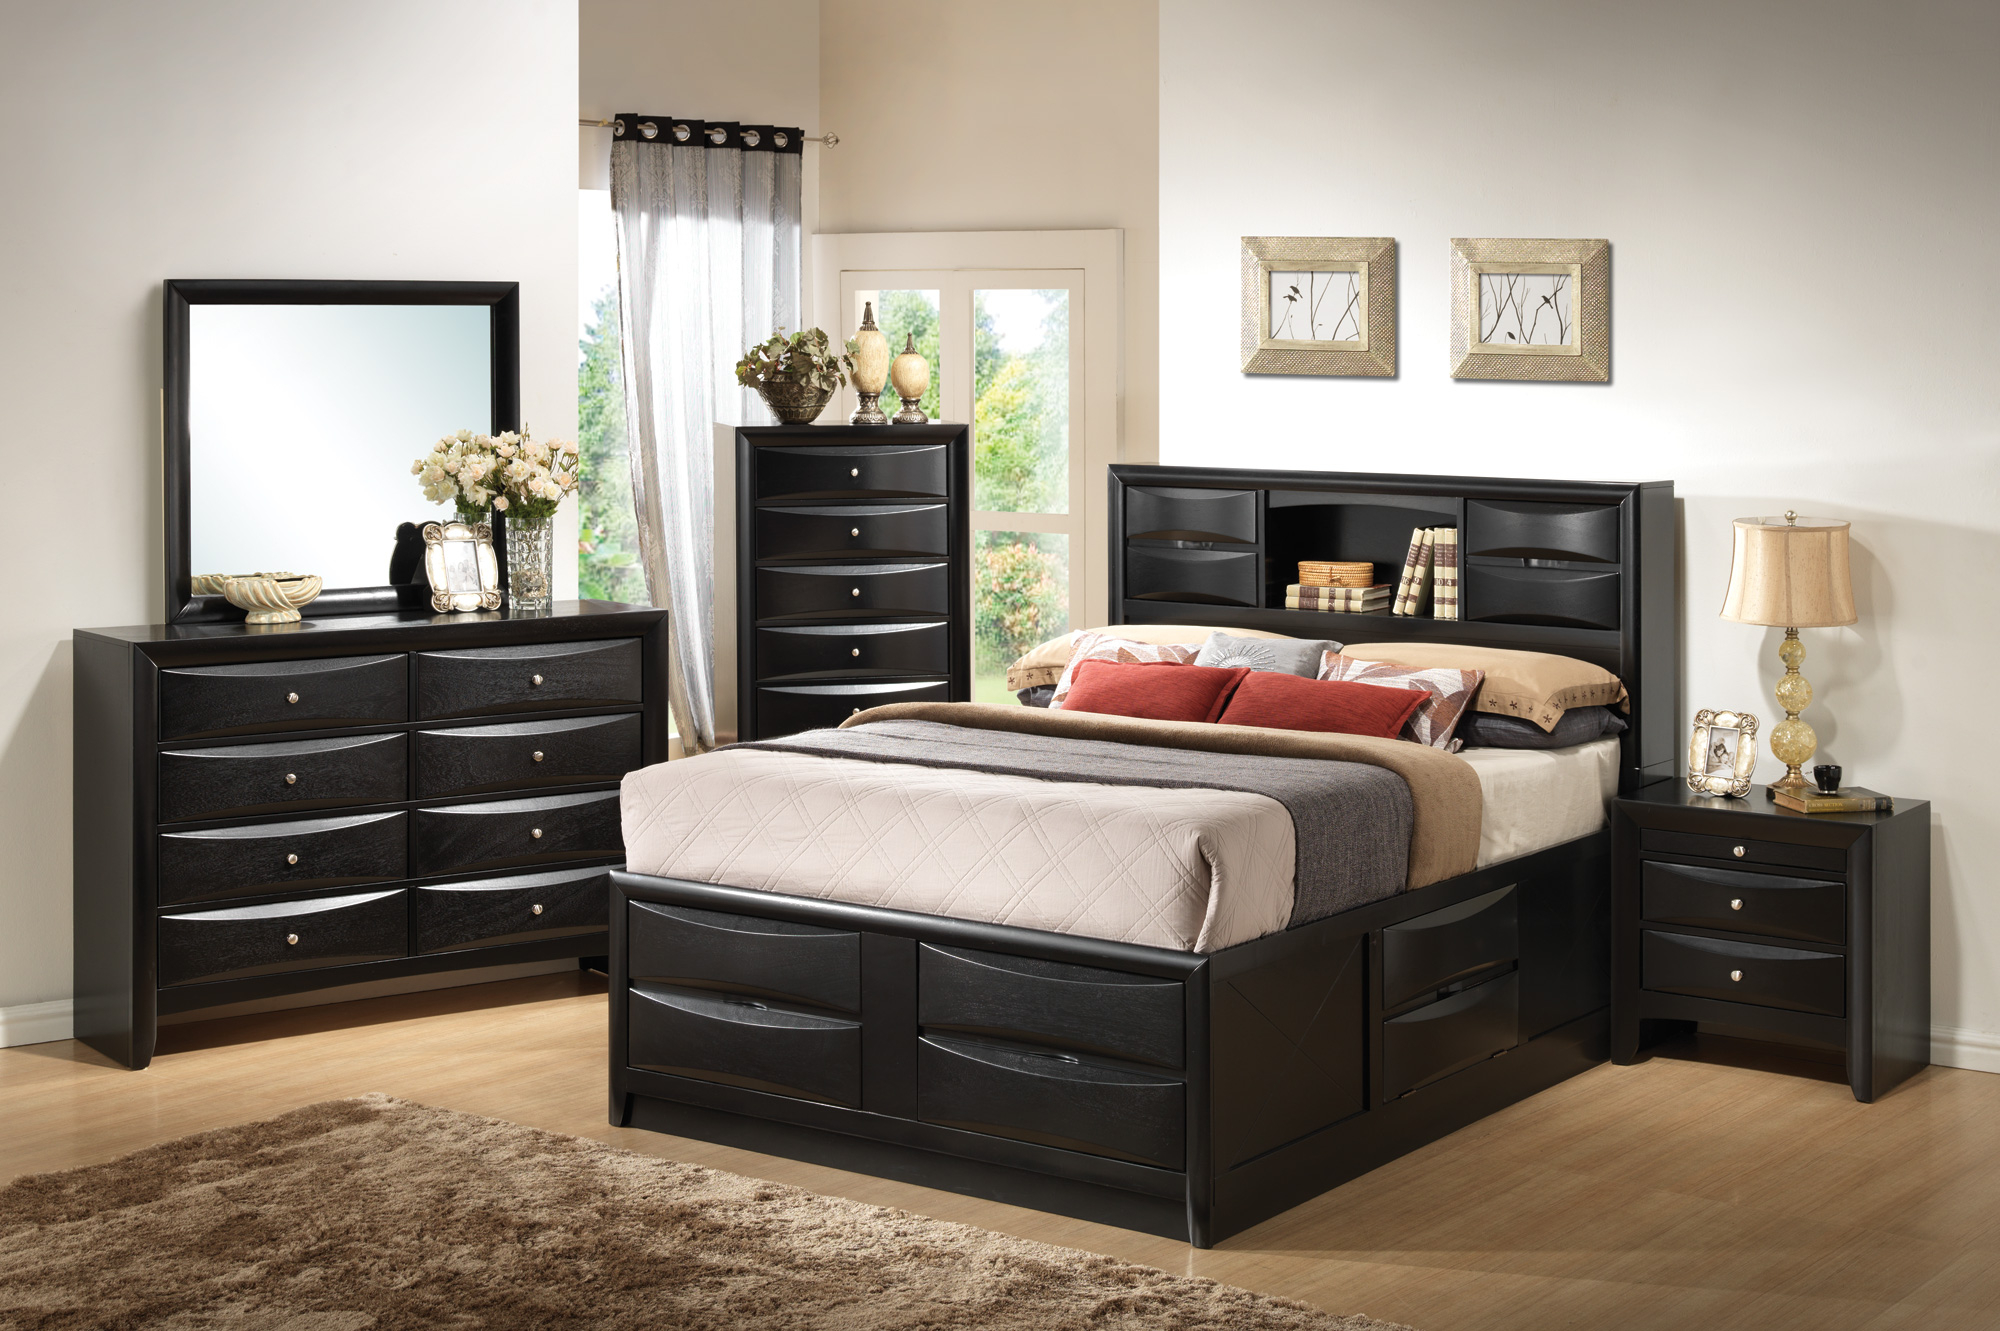 Coaster Briana Queen 5pc Storage Bedroom Set with regard to sizing 2000 X 1331